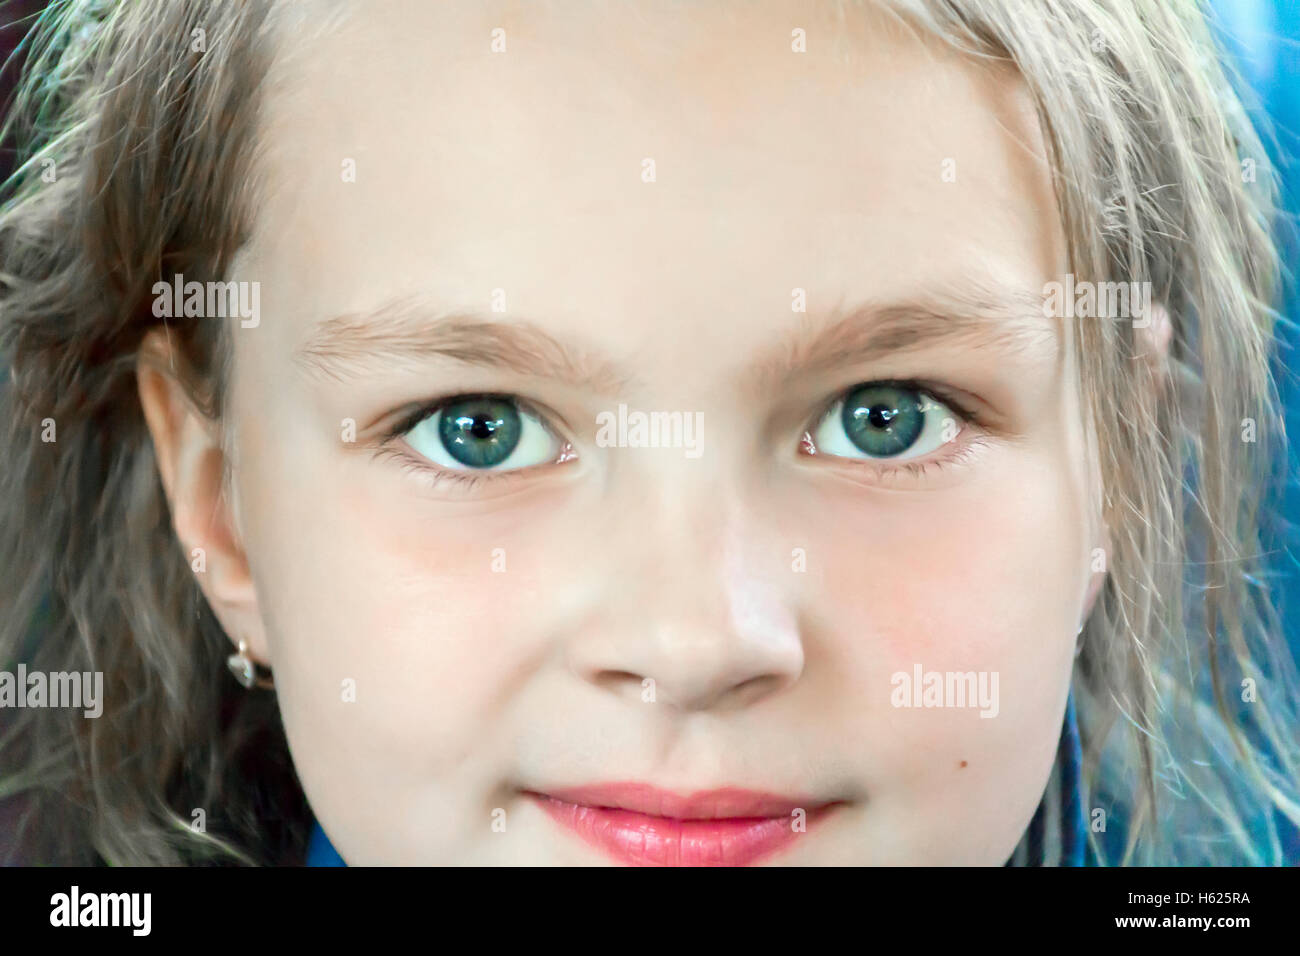 Cute girl with big blue eyes Stock Photo